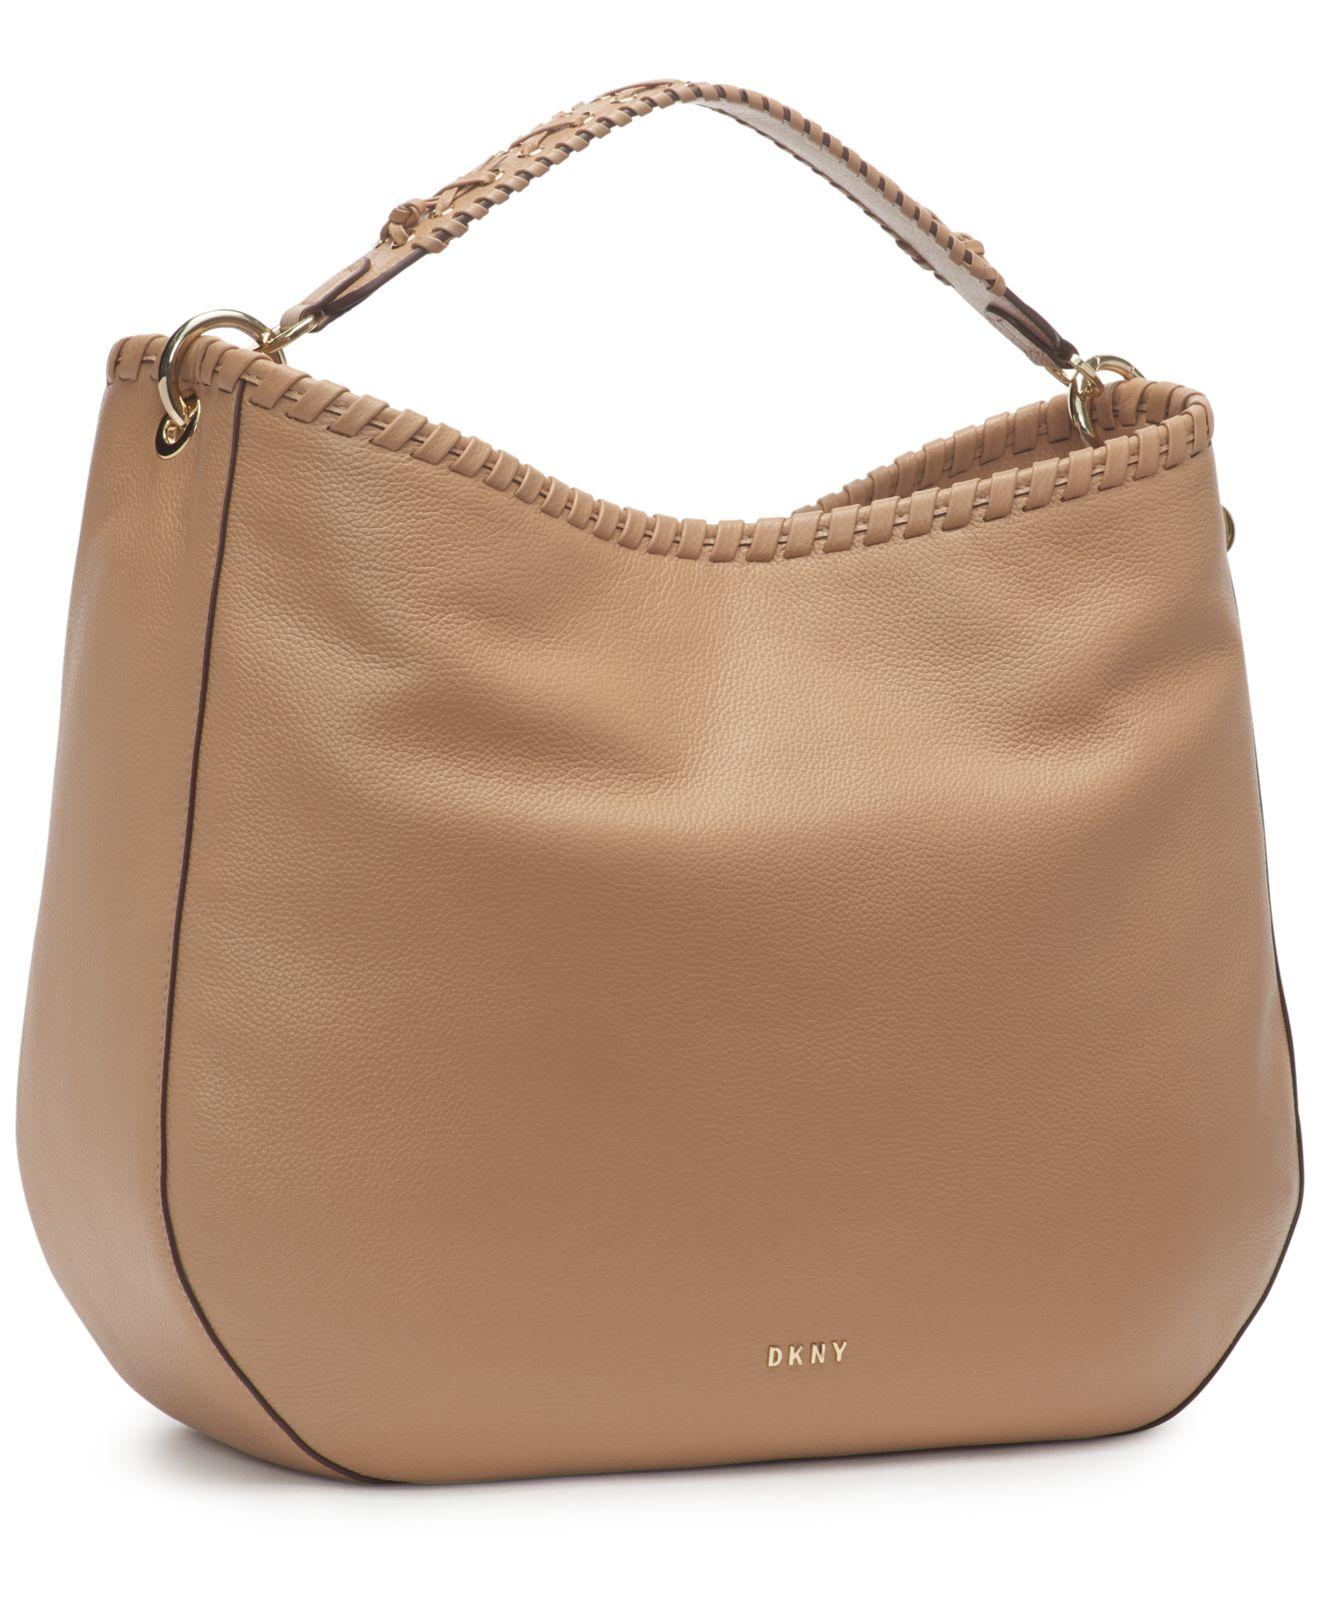 DKNY Leather Winnie Hobo in Natural - Lyst